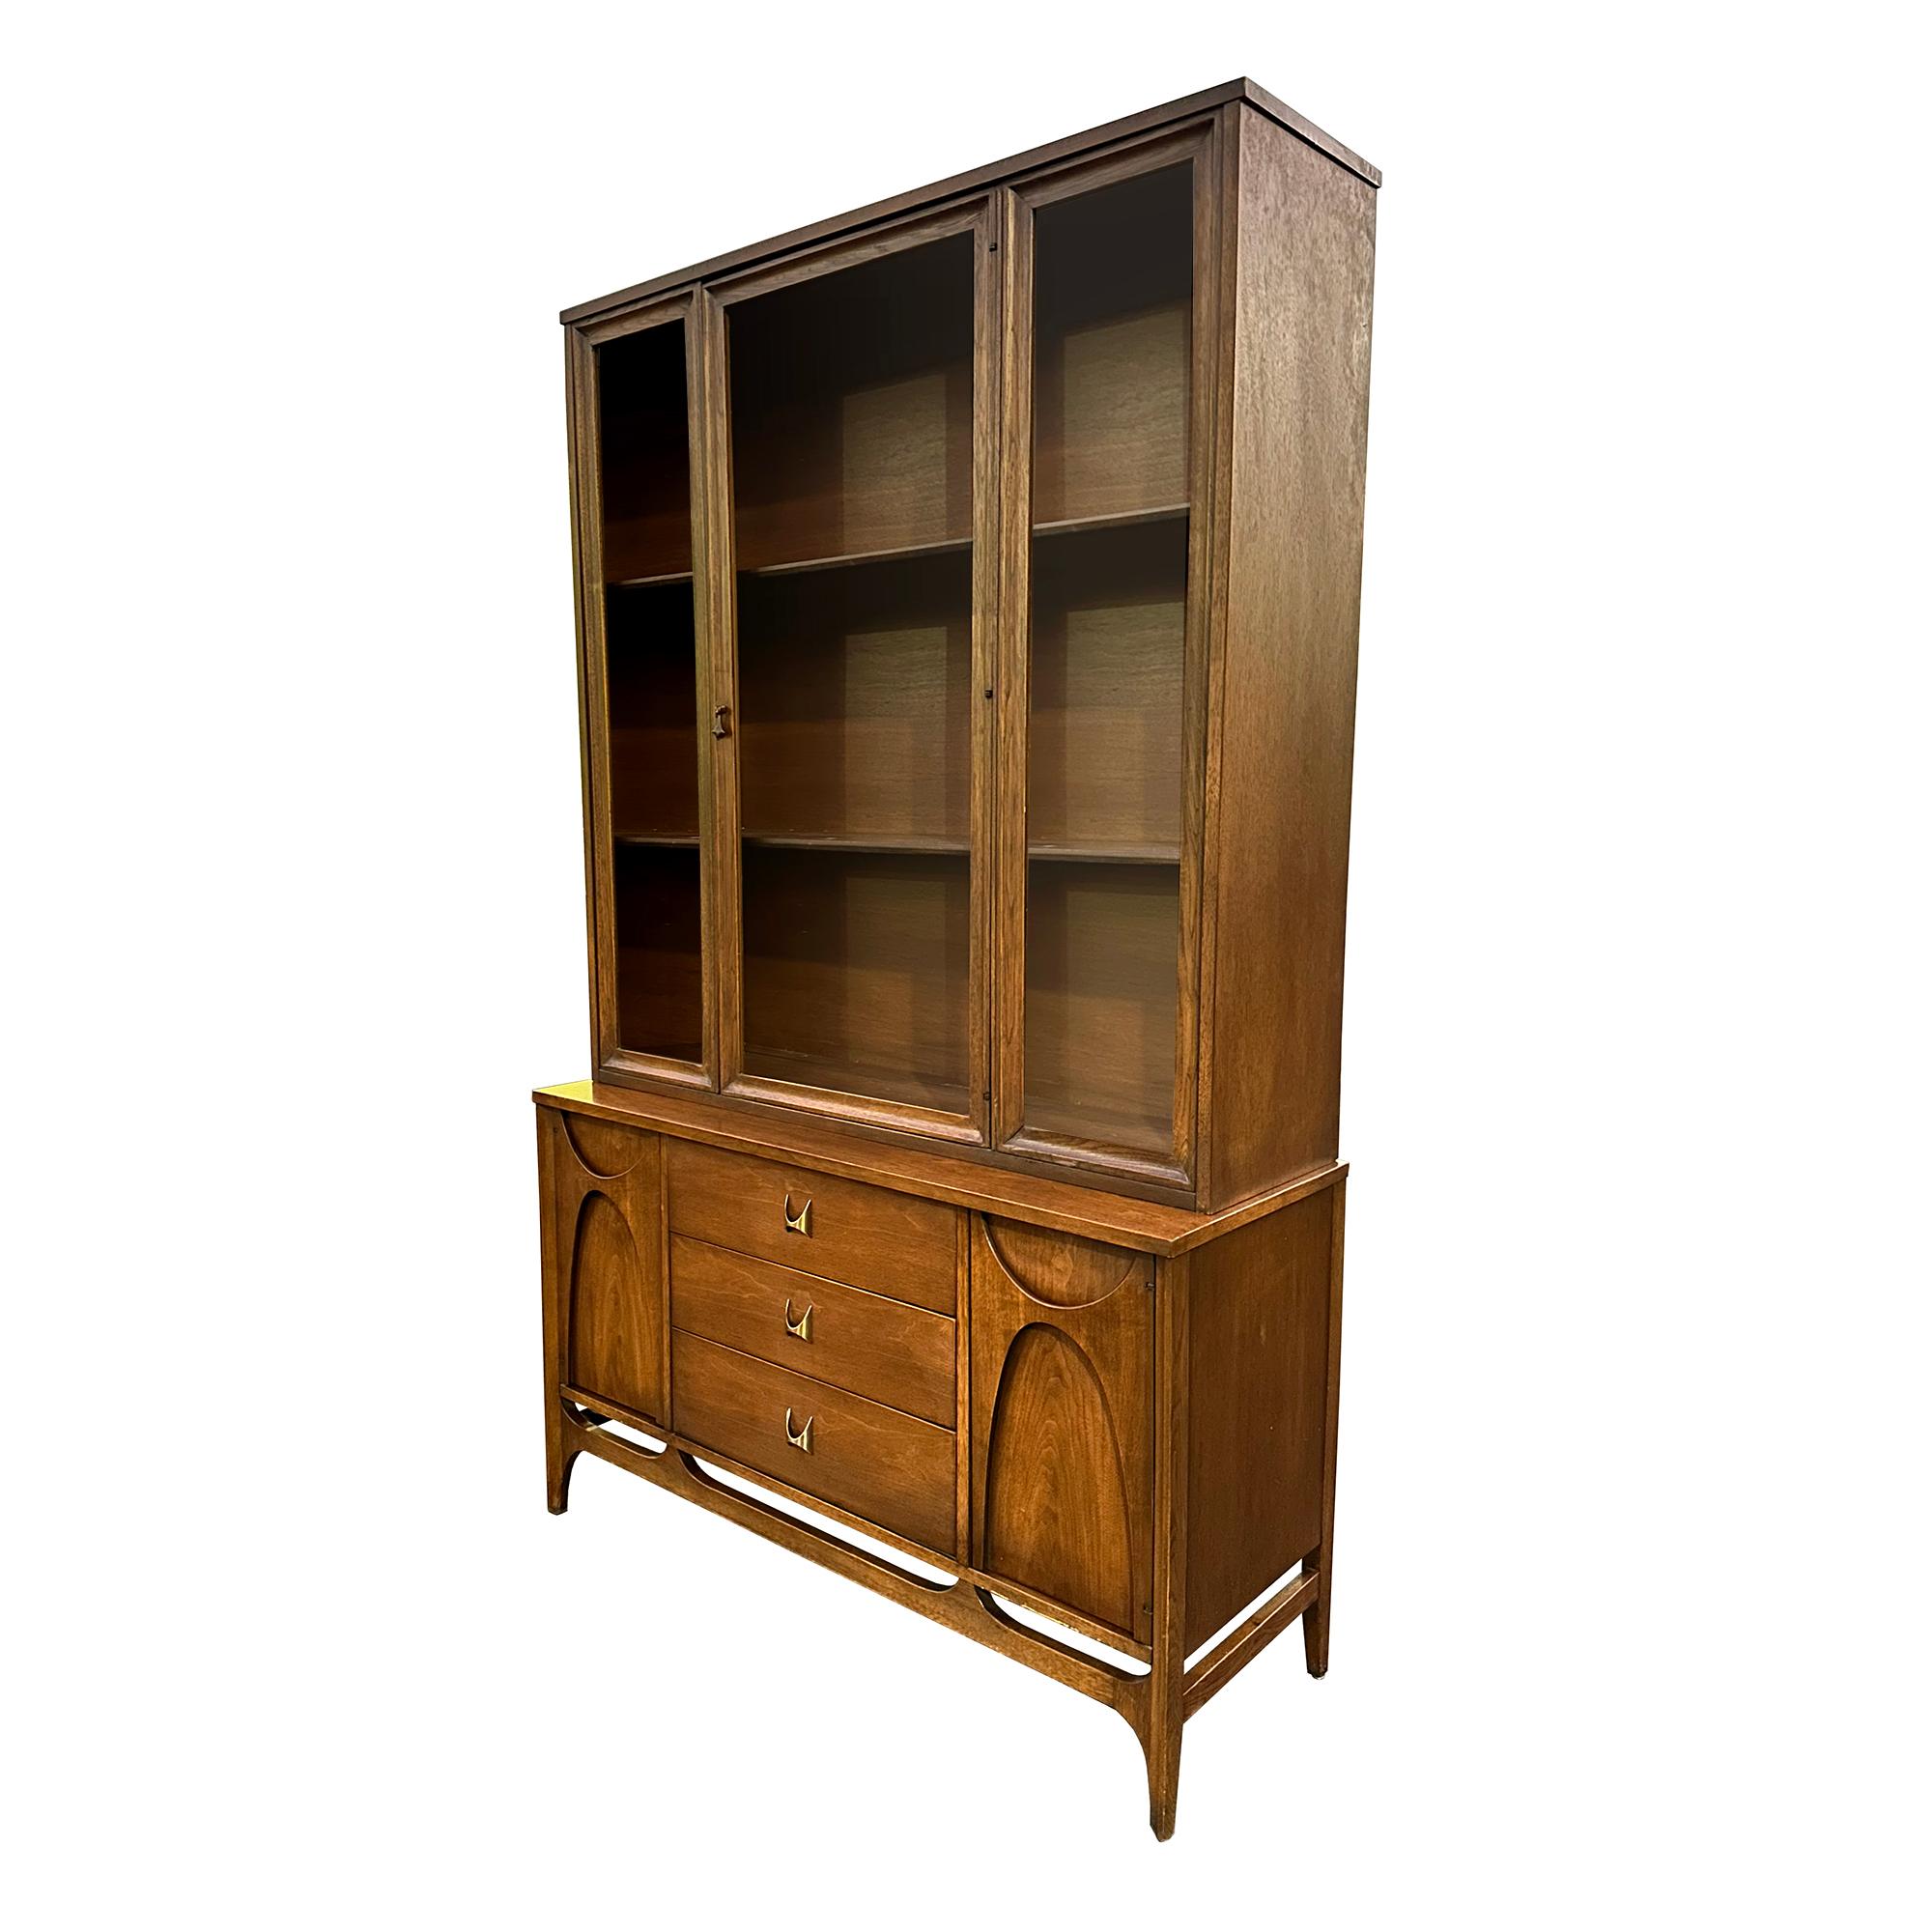 1960s Mid-Century Modern Brasilia walnut credenza with glass hutch top by Broyhill. The bottom piece features 3 center drawers with original brass tone hardware and 2 cabinets. The top piece features a glass door and 2 shelves inside. Good vintage